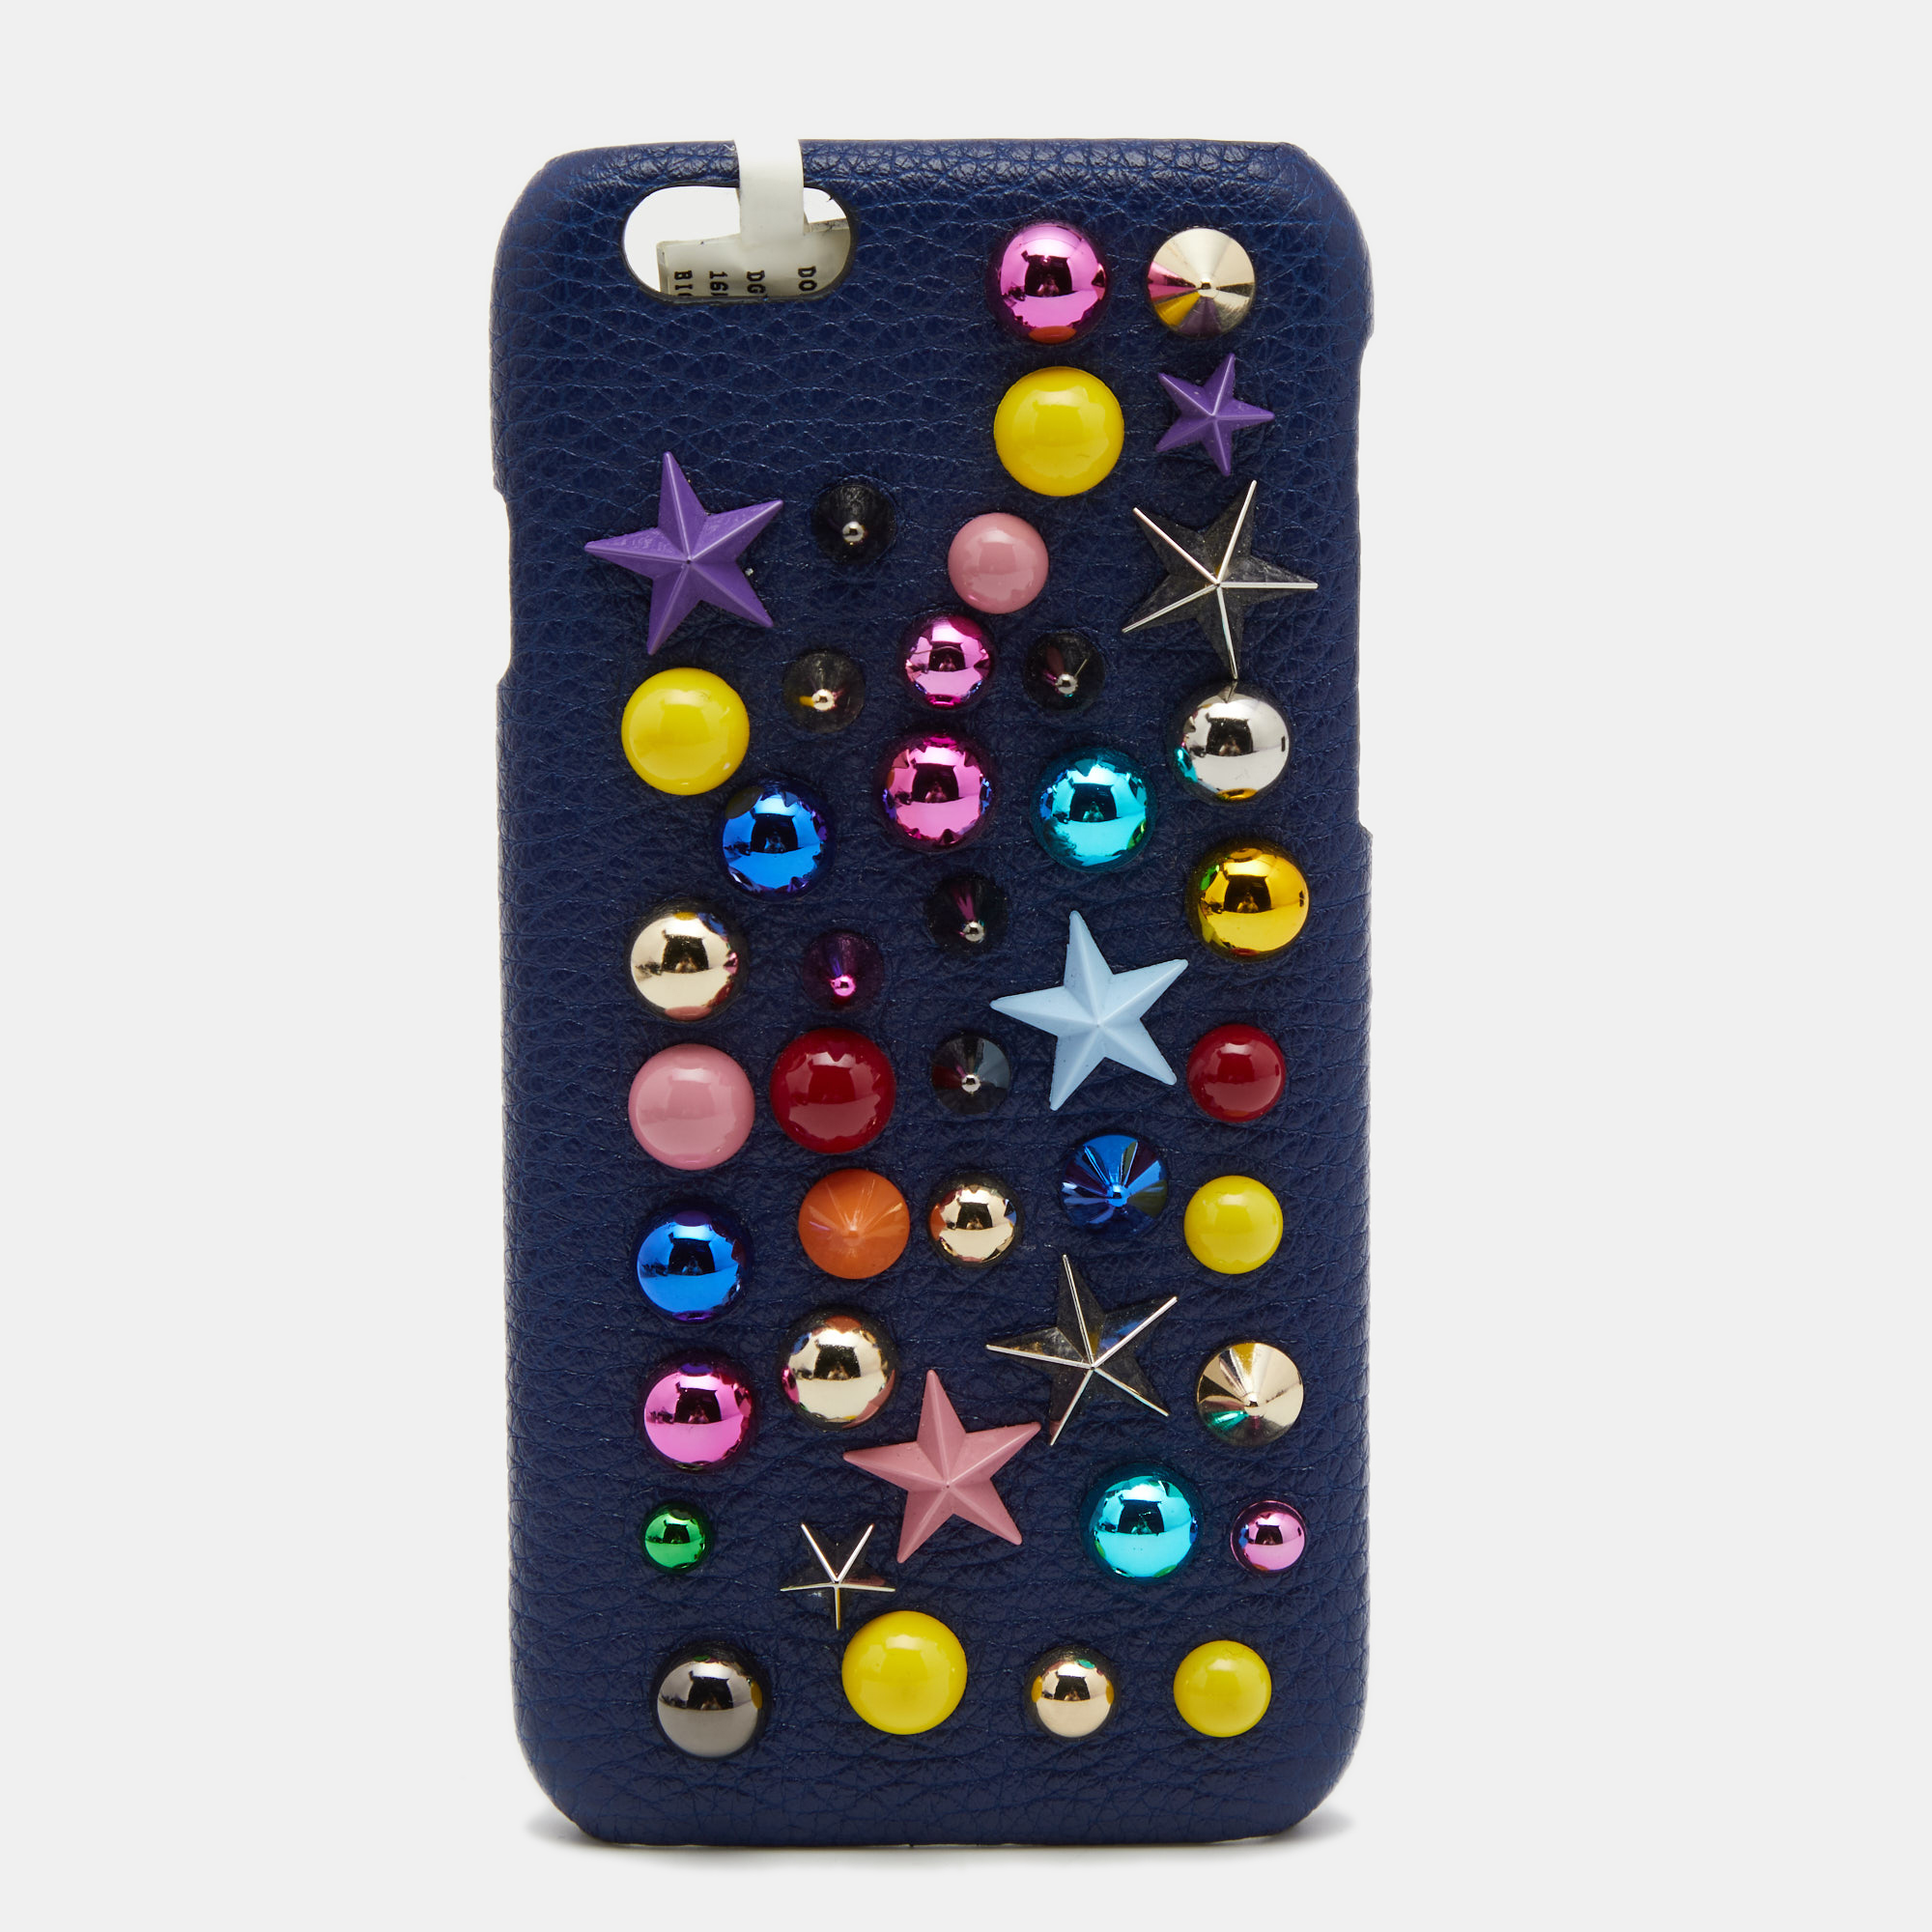 Dolce & Gabbana Blue Leather Embellished IPhone 6 Cover